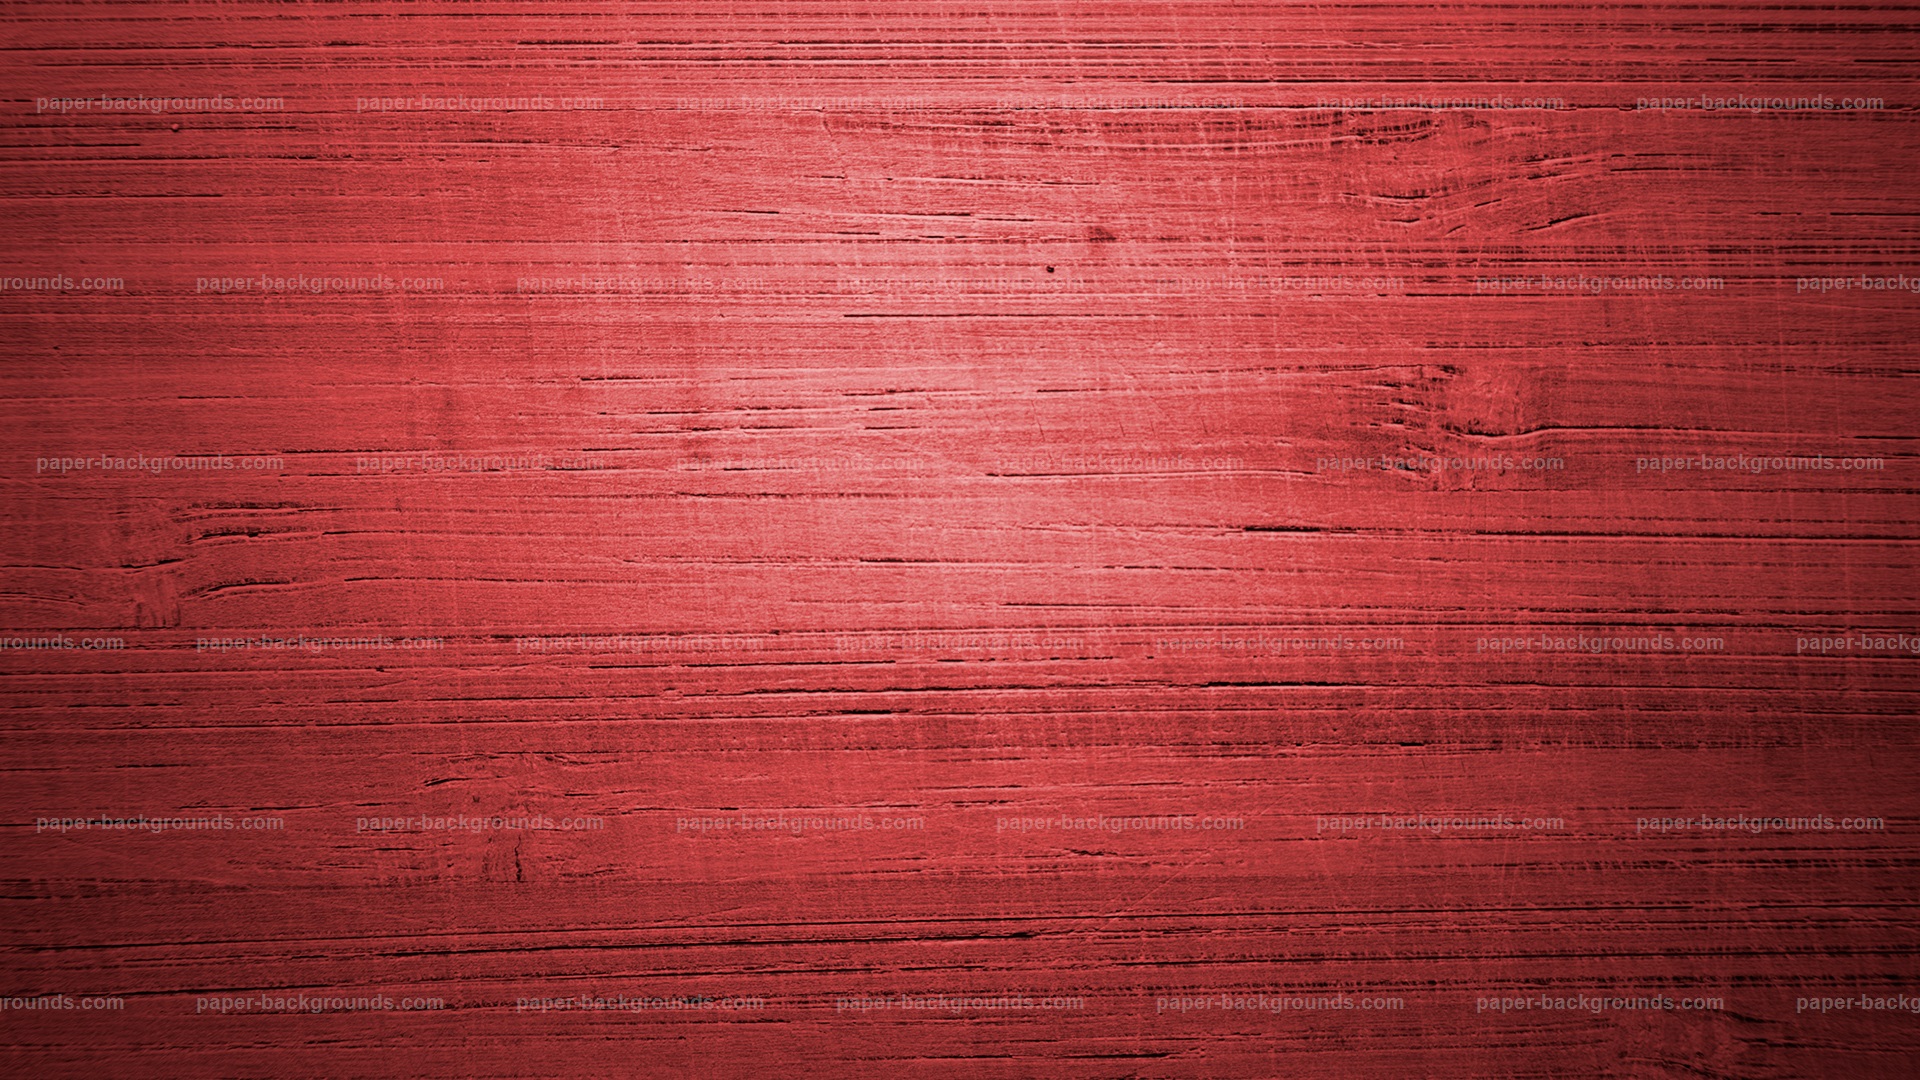 Paper Backgrounds Red Wood Texture Background HD